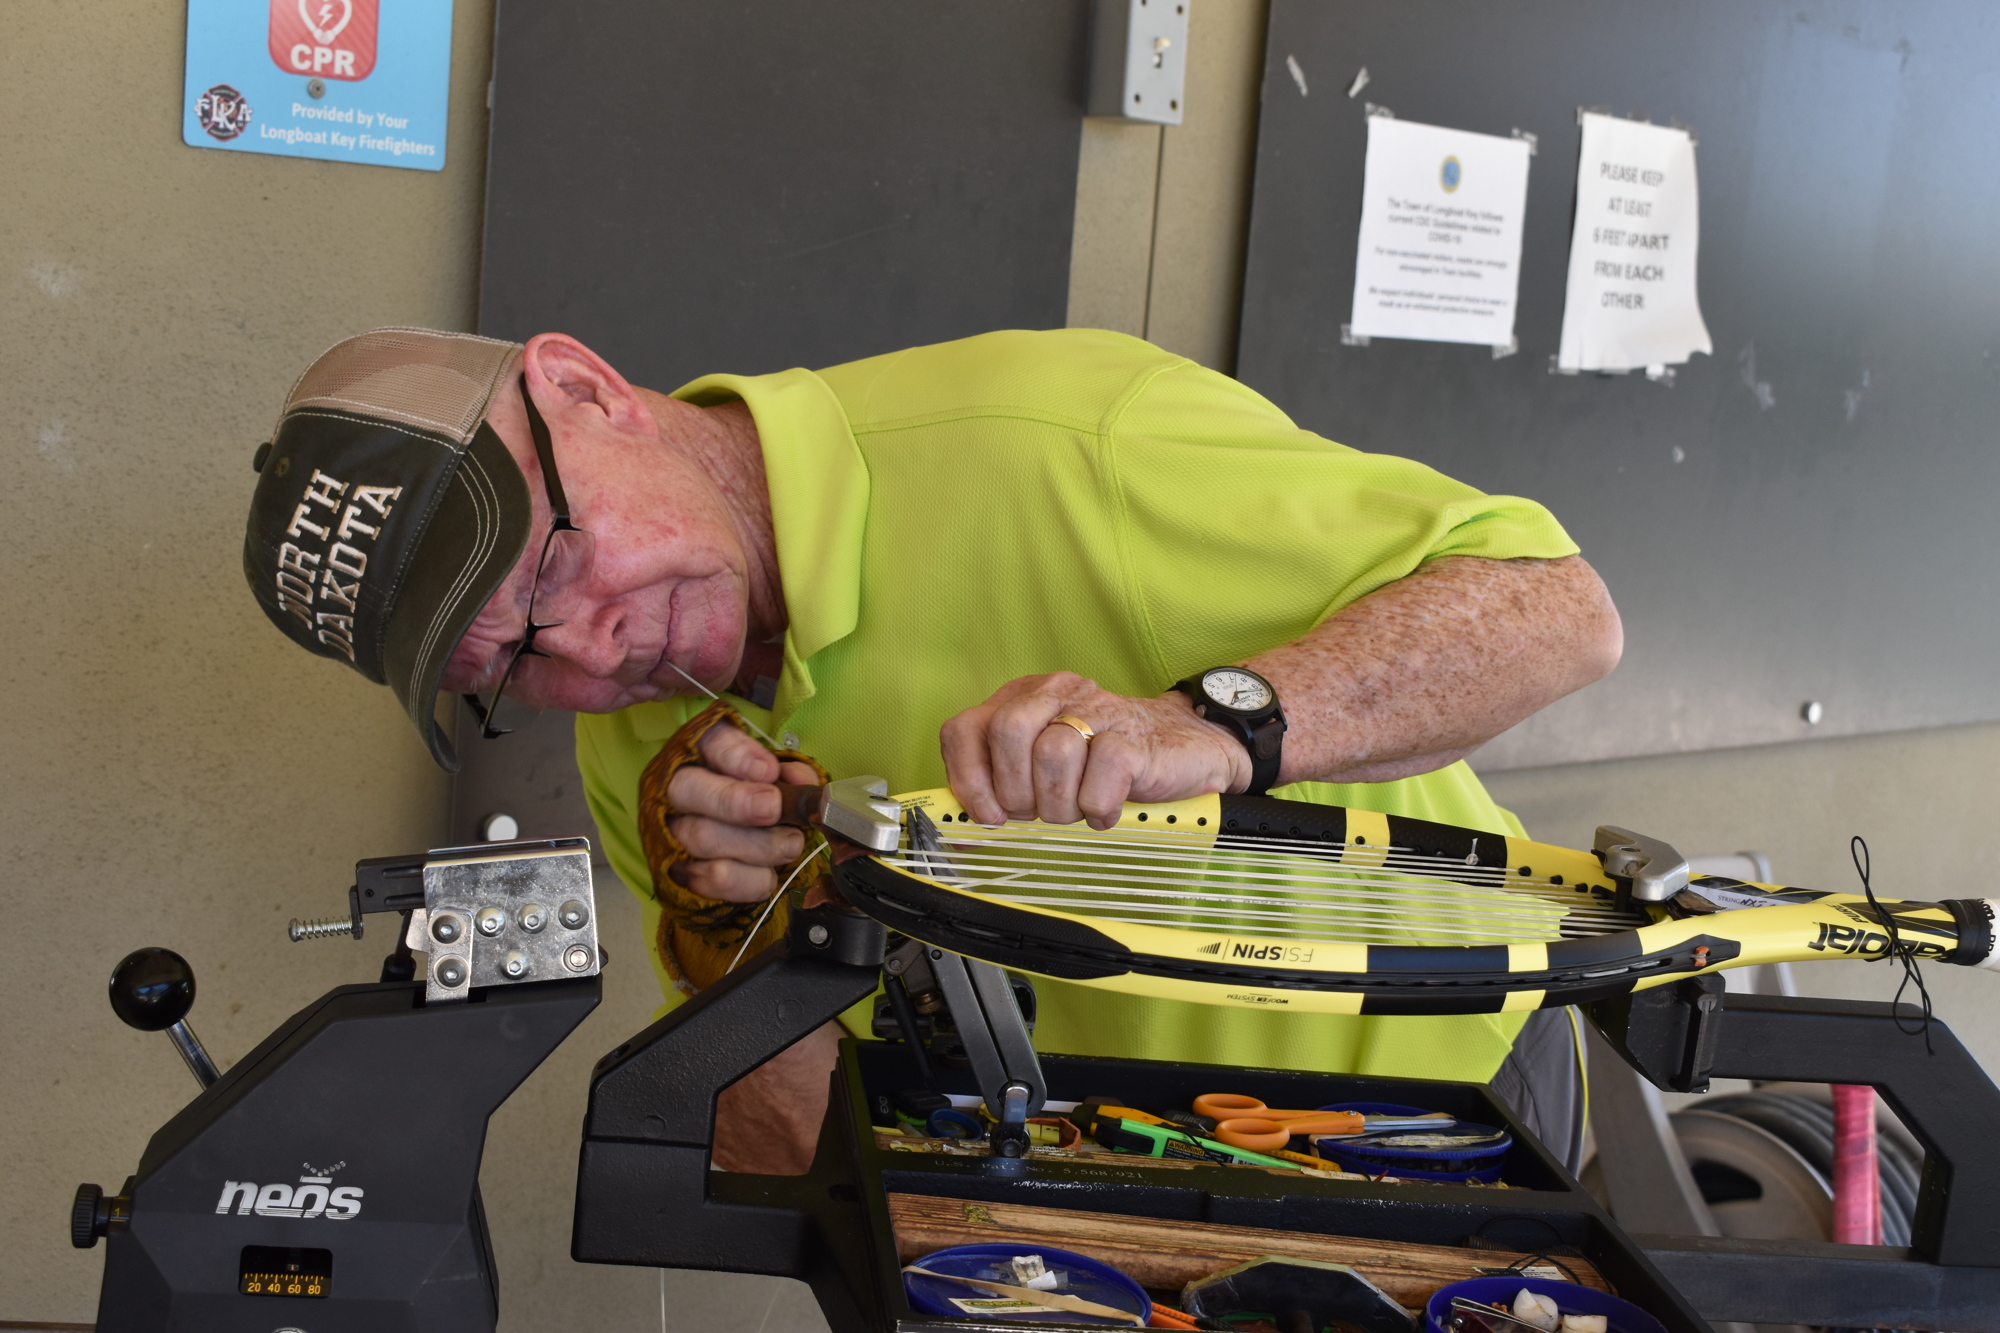 It takes Jay Morgan about 30-40 minutes to restring a tennis racket.